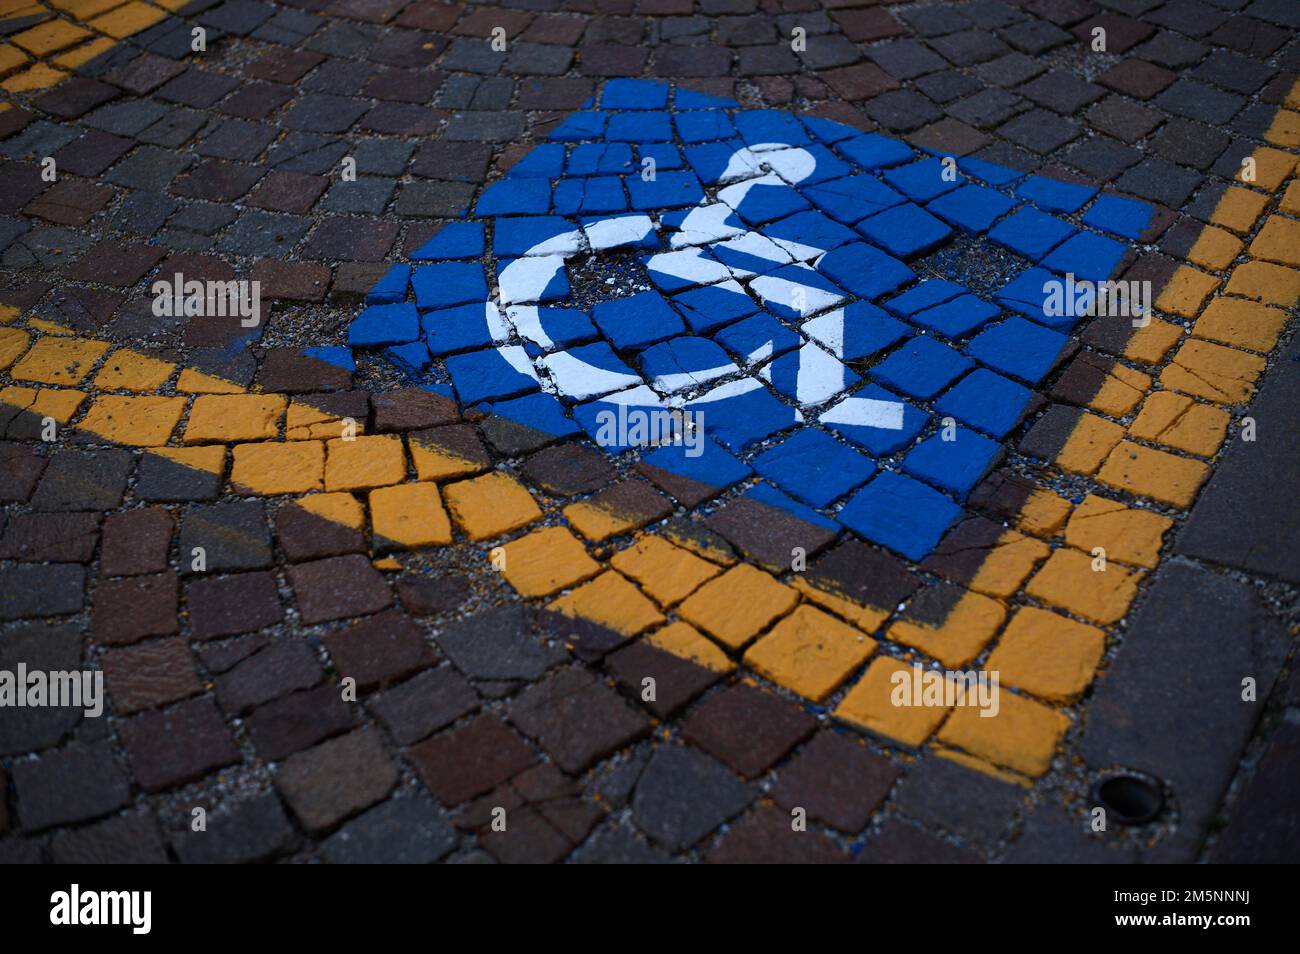 Reserved for wheelchair, severely disabled, marking on pavement, Ortisei, Val Gardena, South Tyrol, Italy Stock Photo